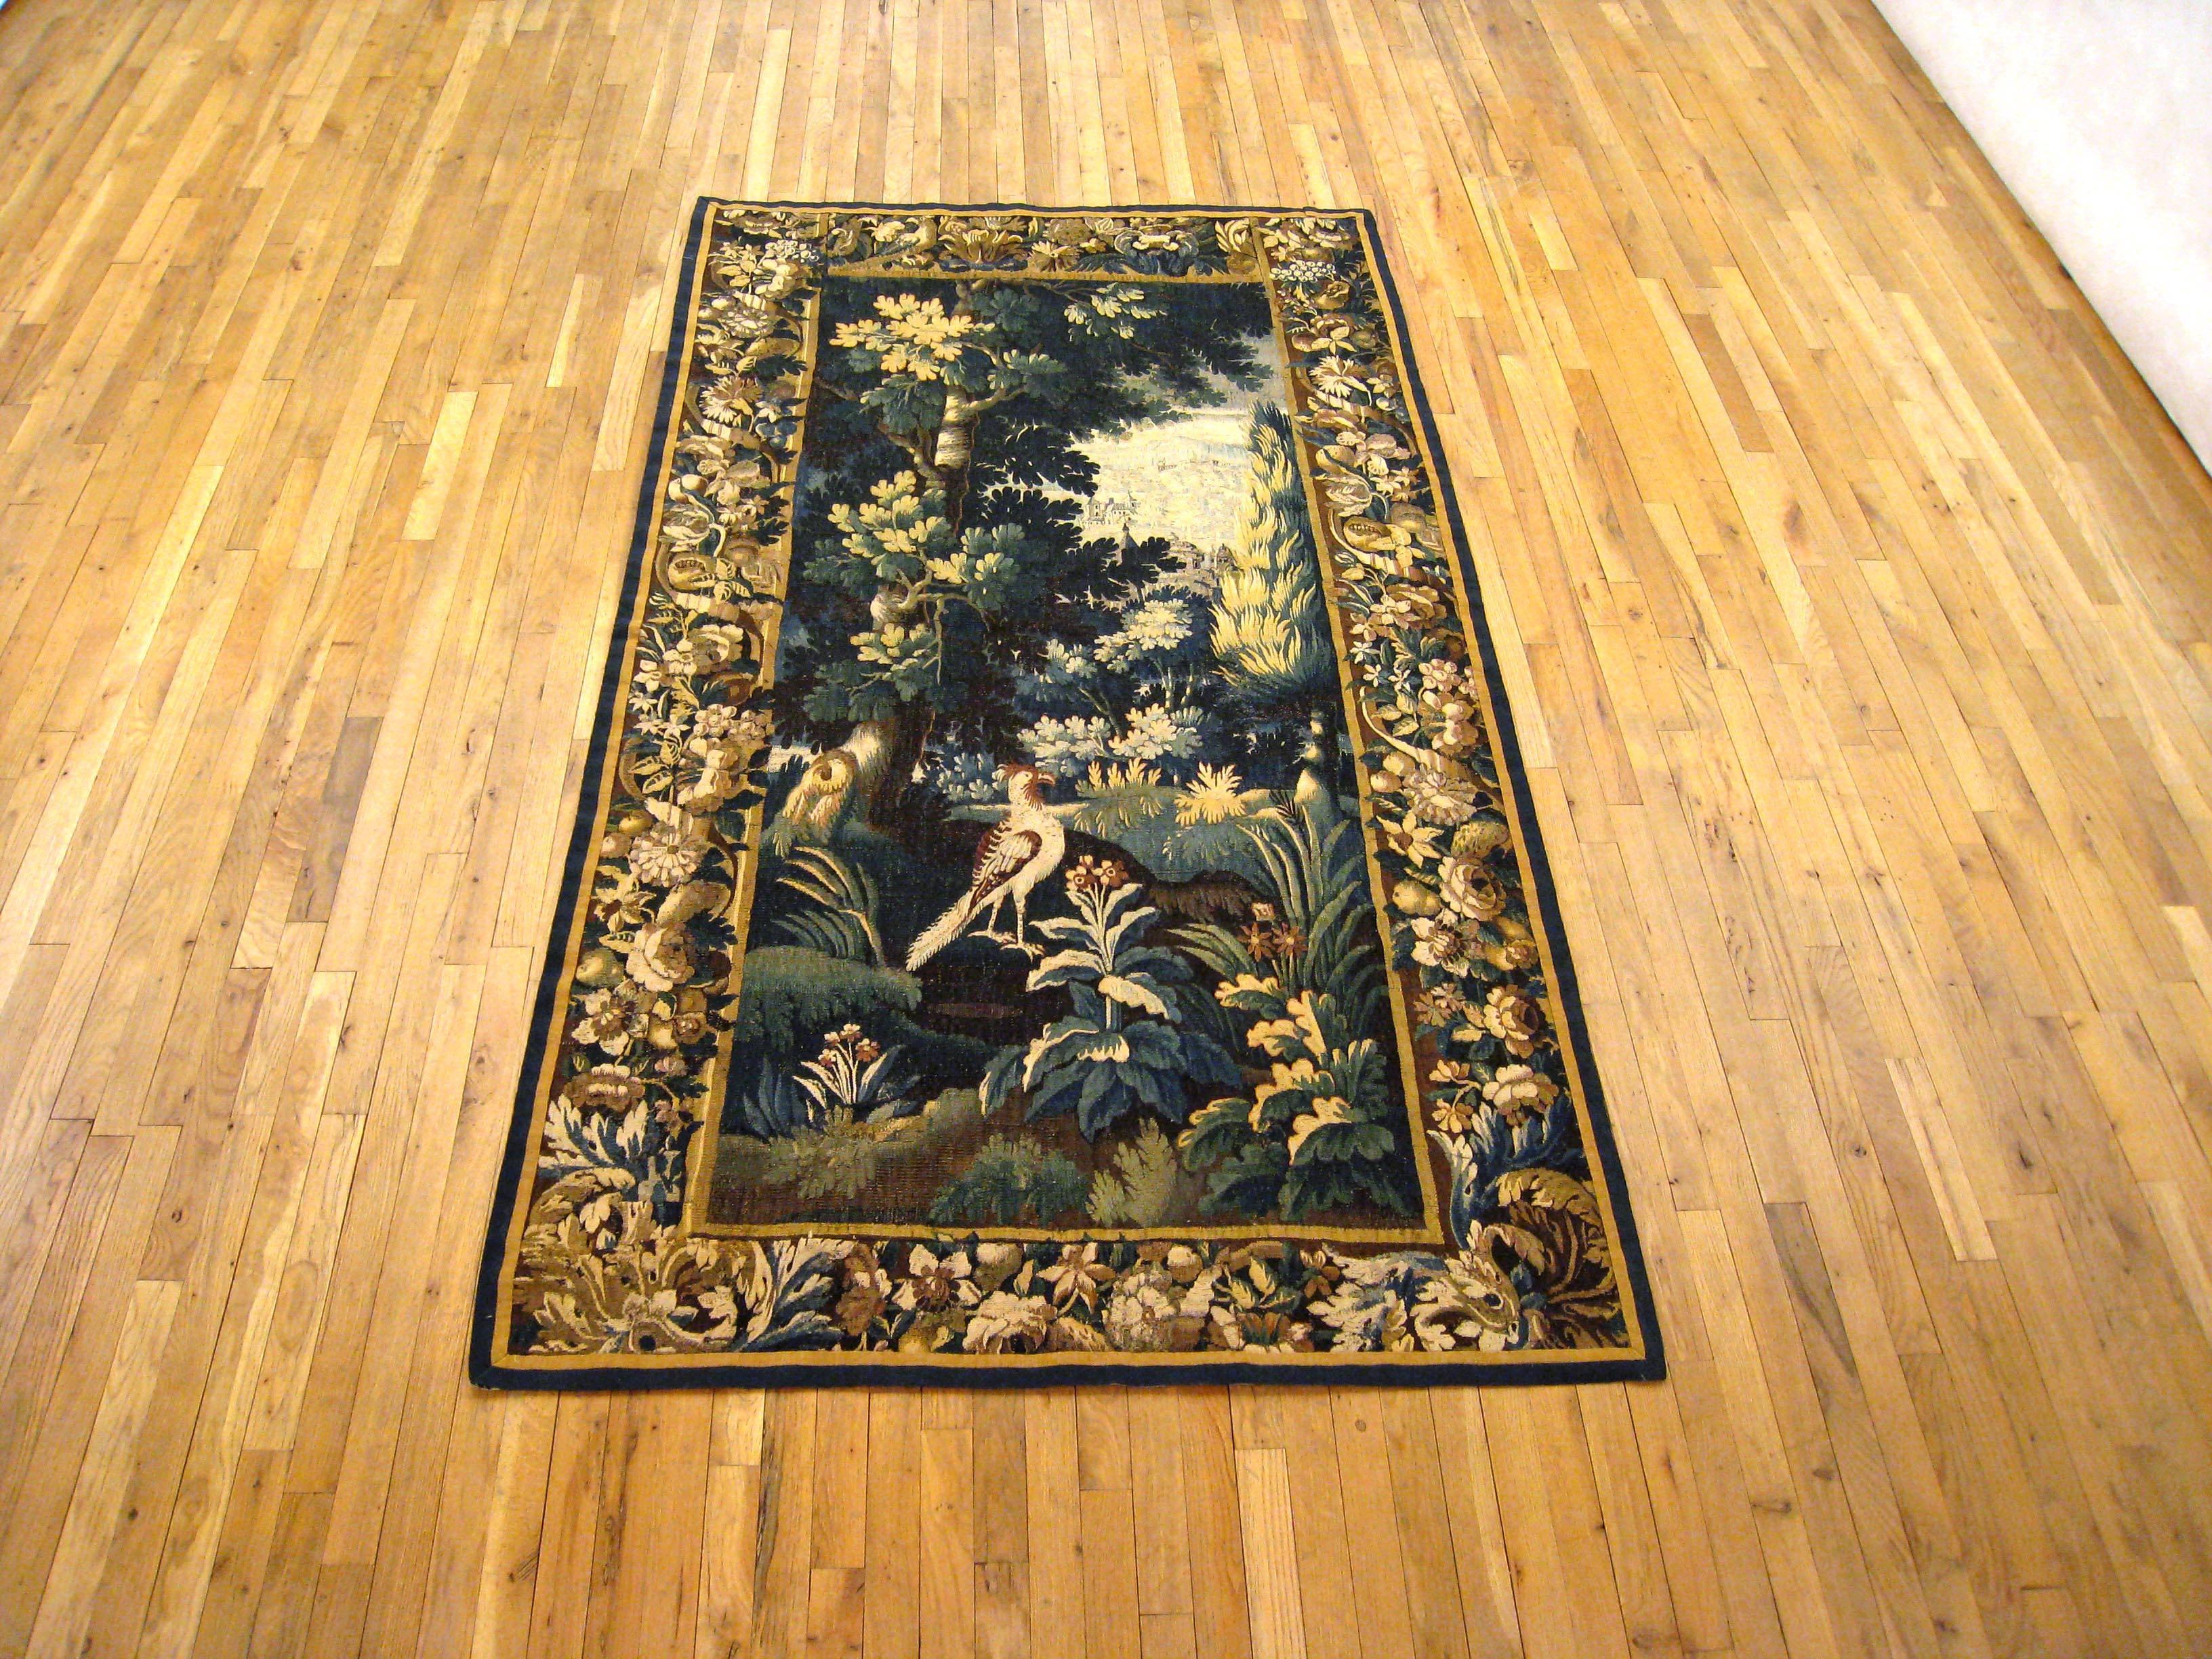 An antique 18th century Flemish verdure landscape tapestry, size: 8.0 H x 4.6 W. This fine handwoven European wall hanging features a lovely landscape scene, with an exotic bird in a lush verdant setting. Enclosed within an elaborate scrolling